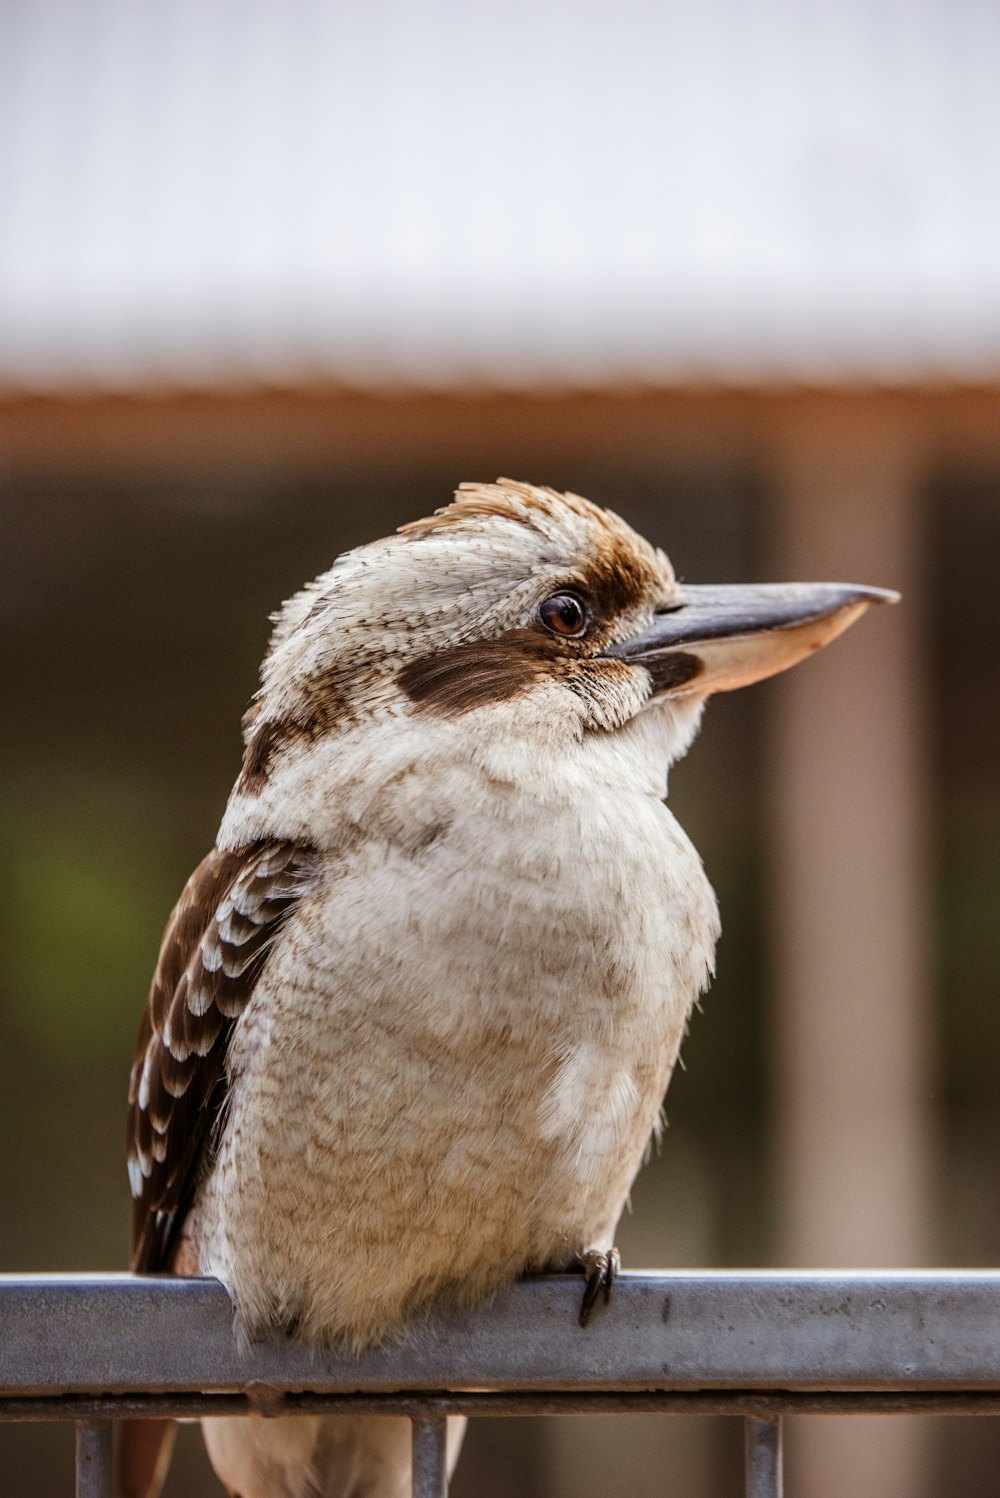 brown and white bird in close up photography